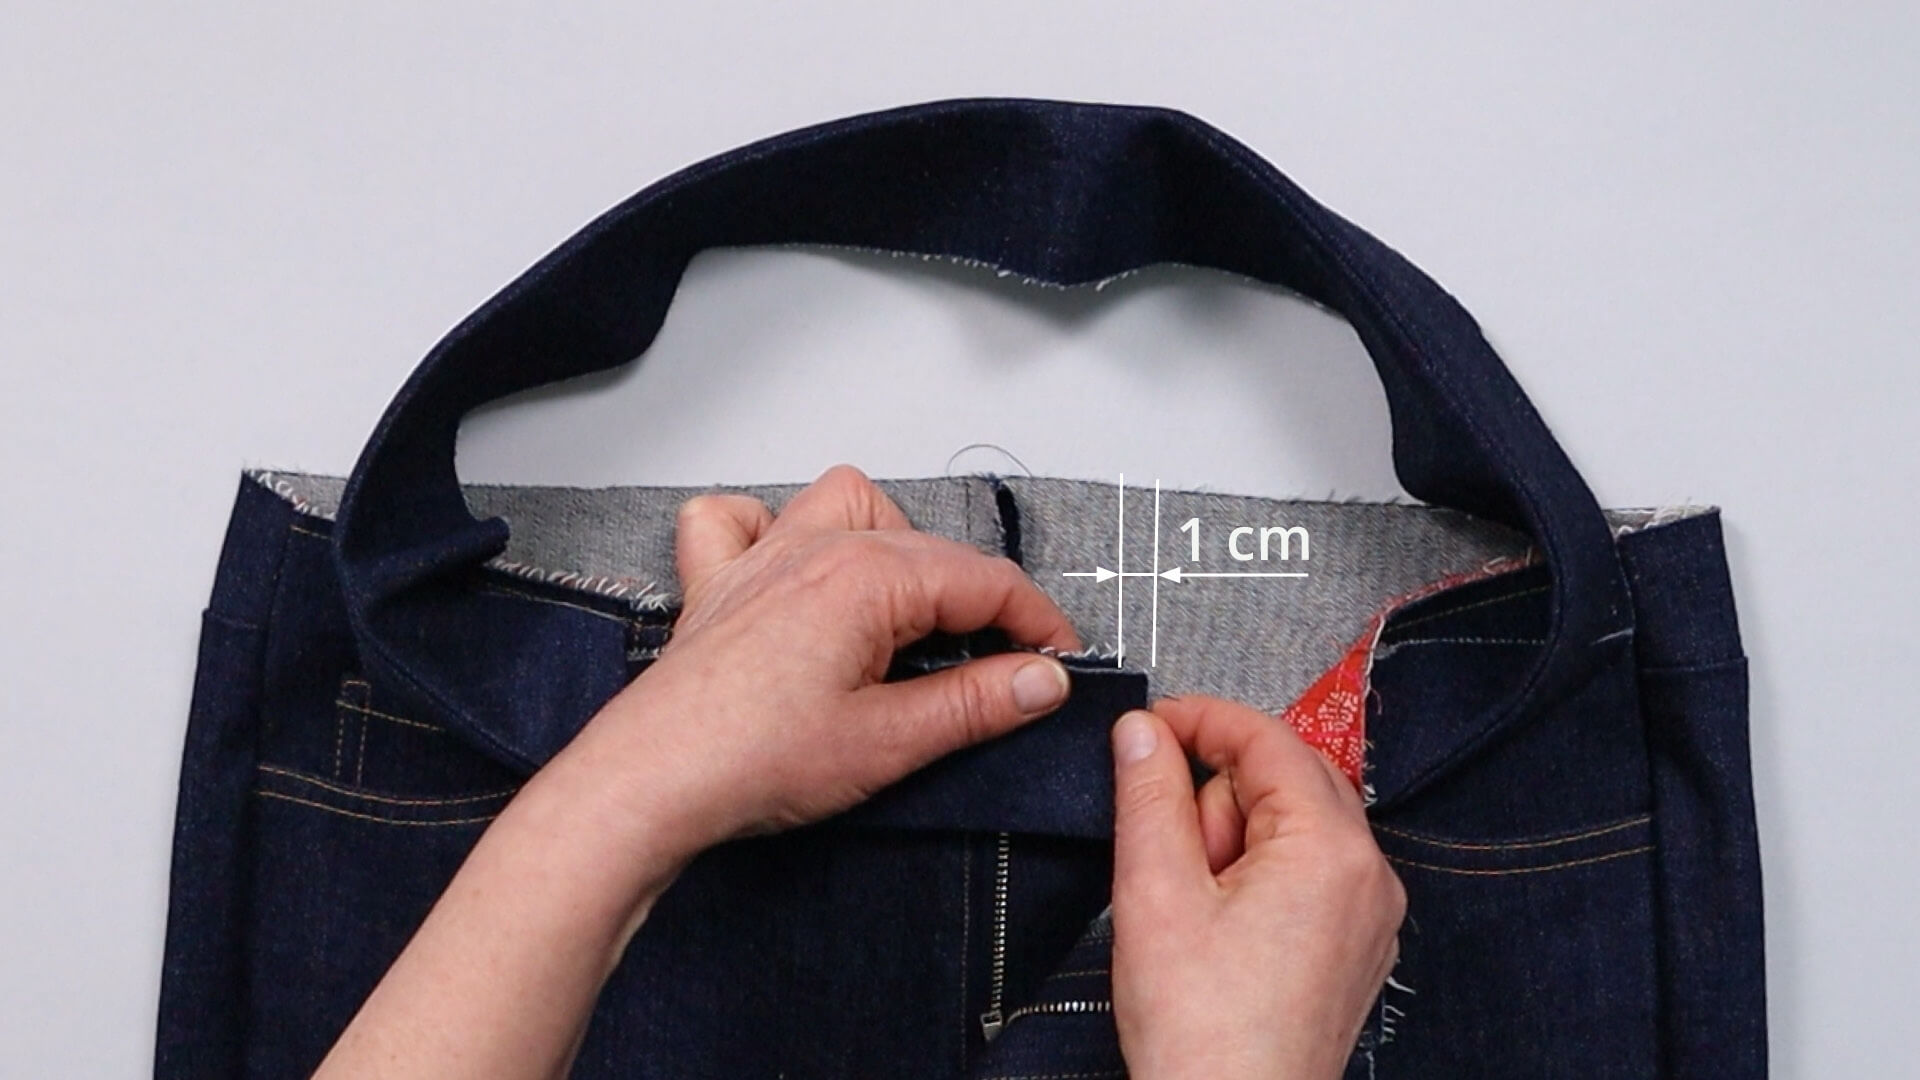 The picture shows the waistband overhang on the right-hand side.